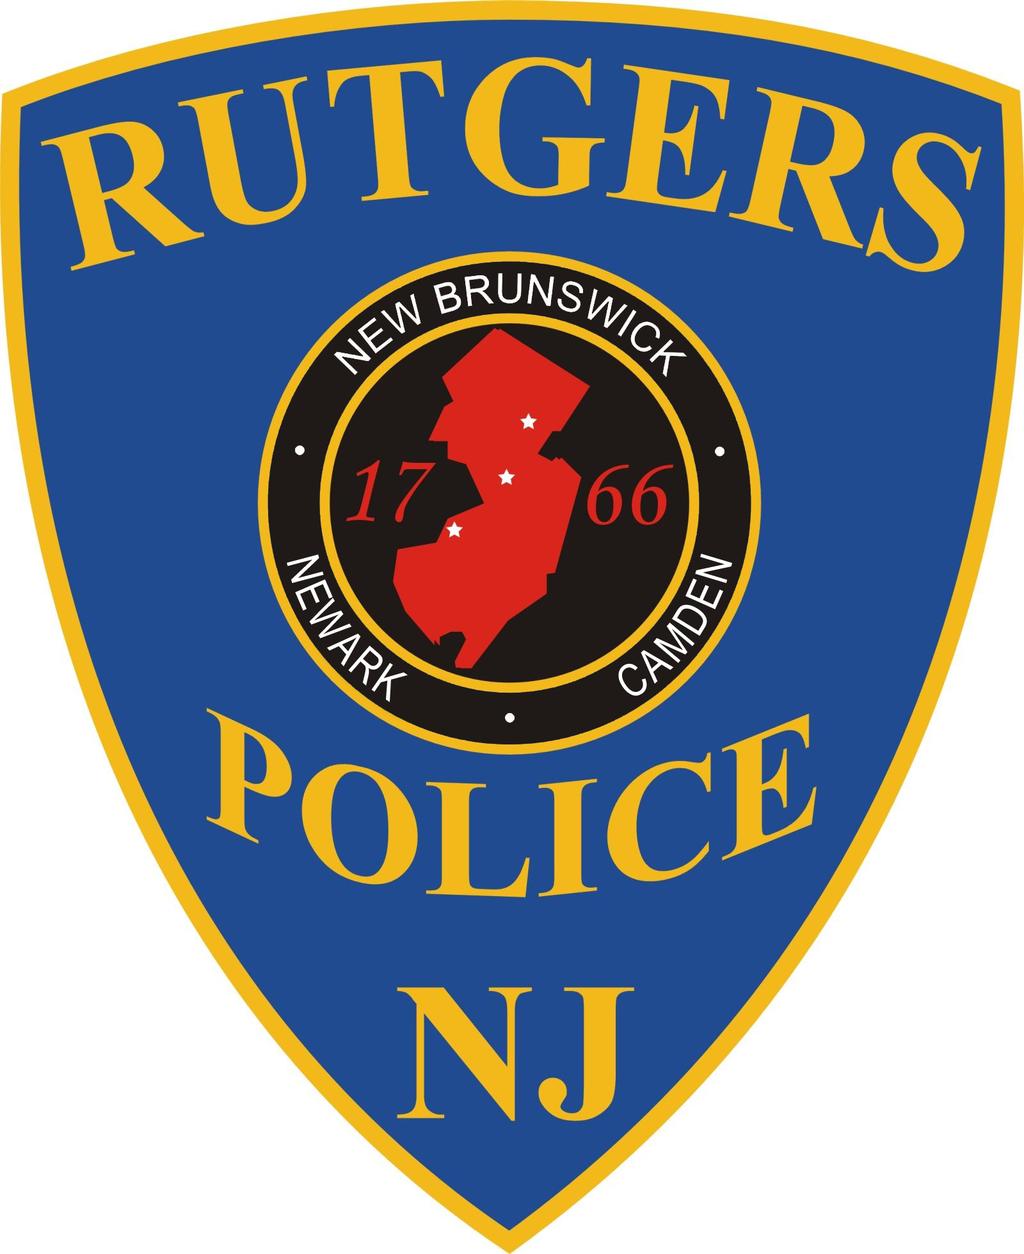 Daily Crime and Fire Safety Log Rutgers PD Saturday 01 September 2018 Sunday 30 September 2018 Incident 183000391 2c:2517 Domestic Violence 09/02/18 0228Hrs 09/02/18 0214Hrs 183000391 09/02/18